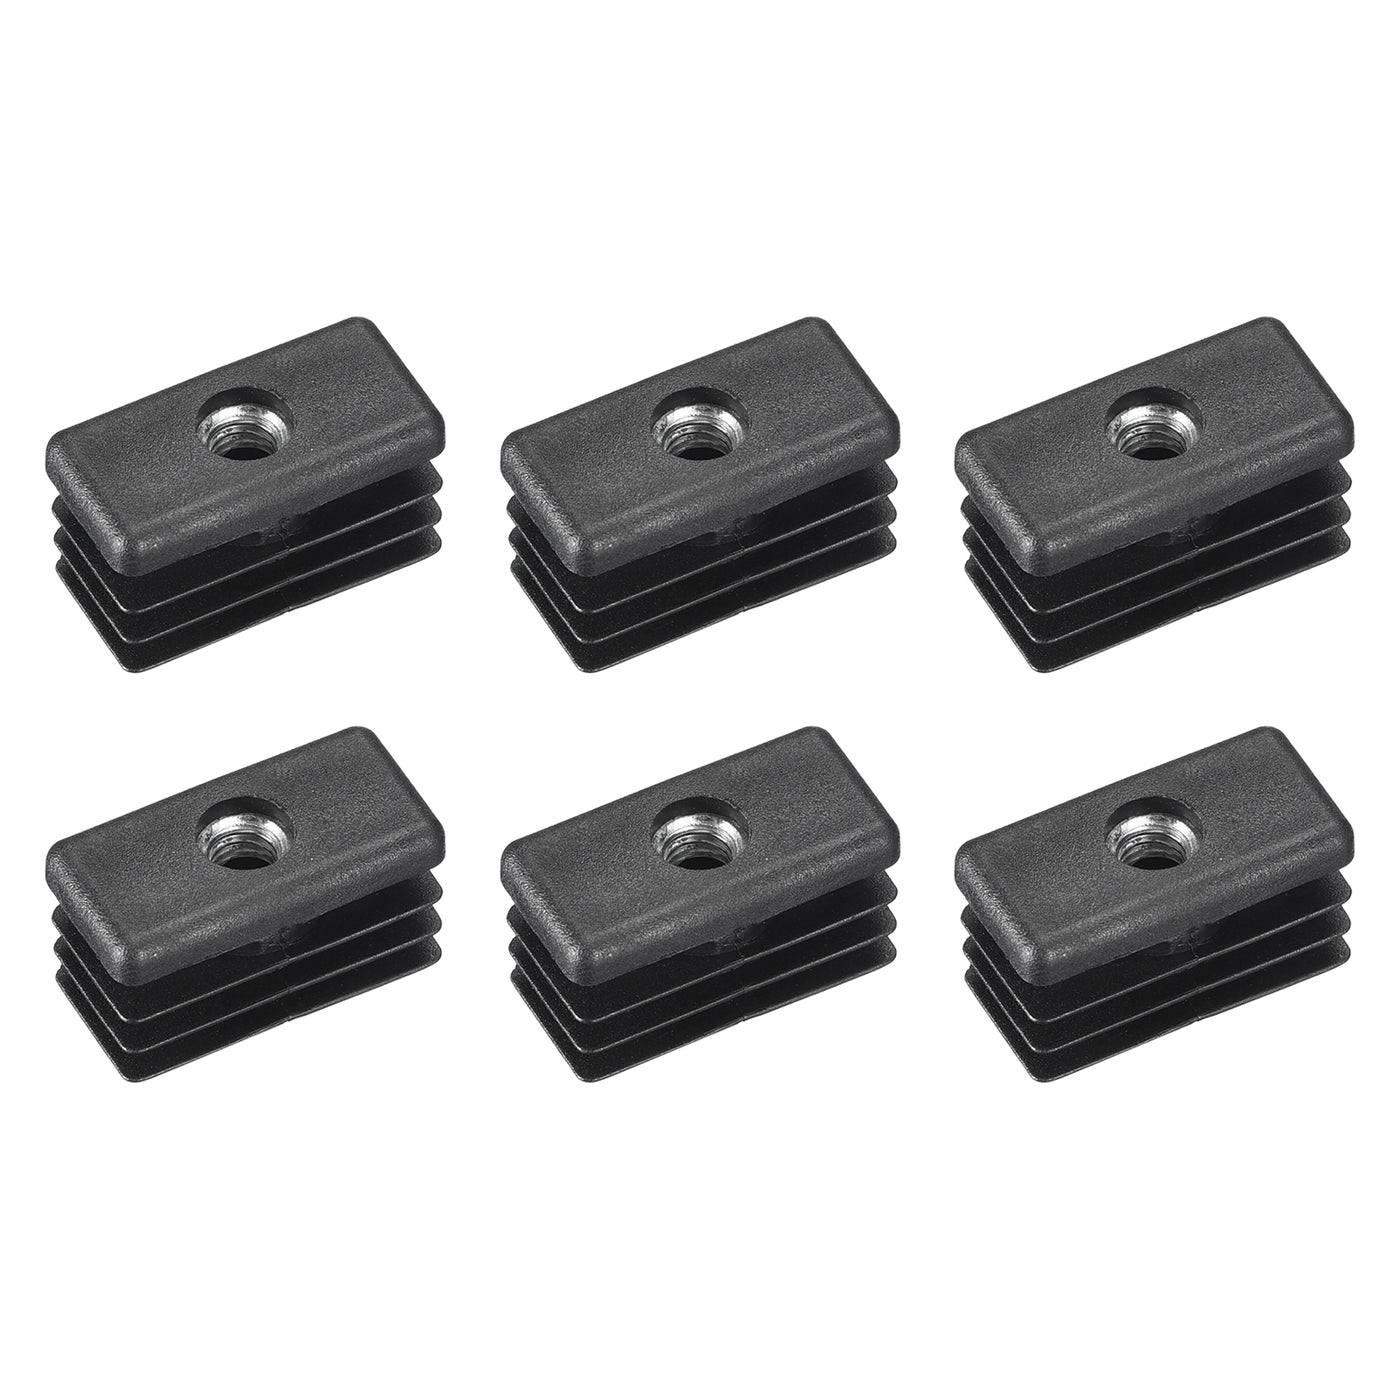 uxcell Uxcell 6Pcs 1.18"x0.59" Caster Insert with Thread, Square M6 Thread for Furniture